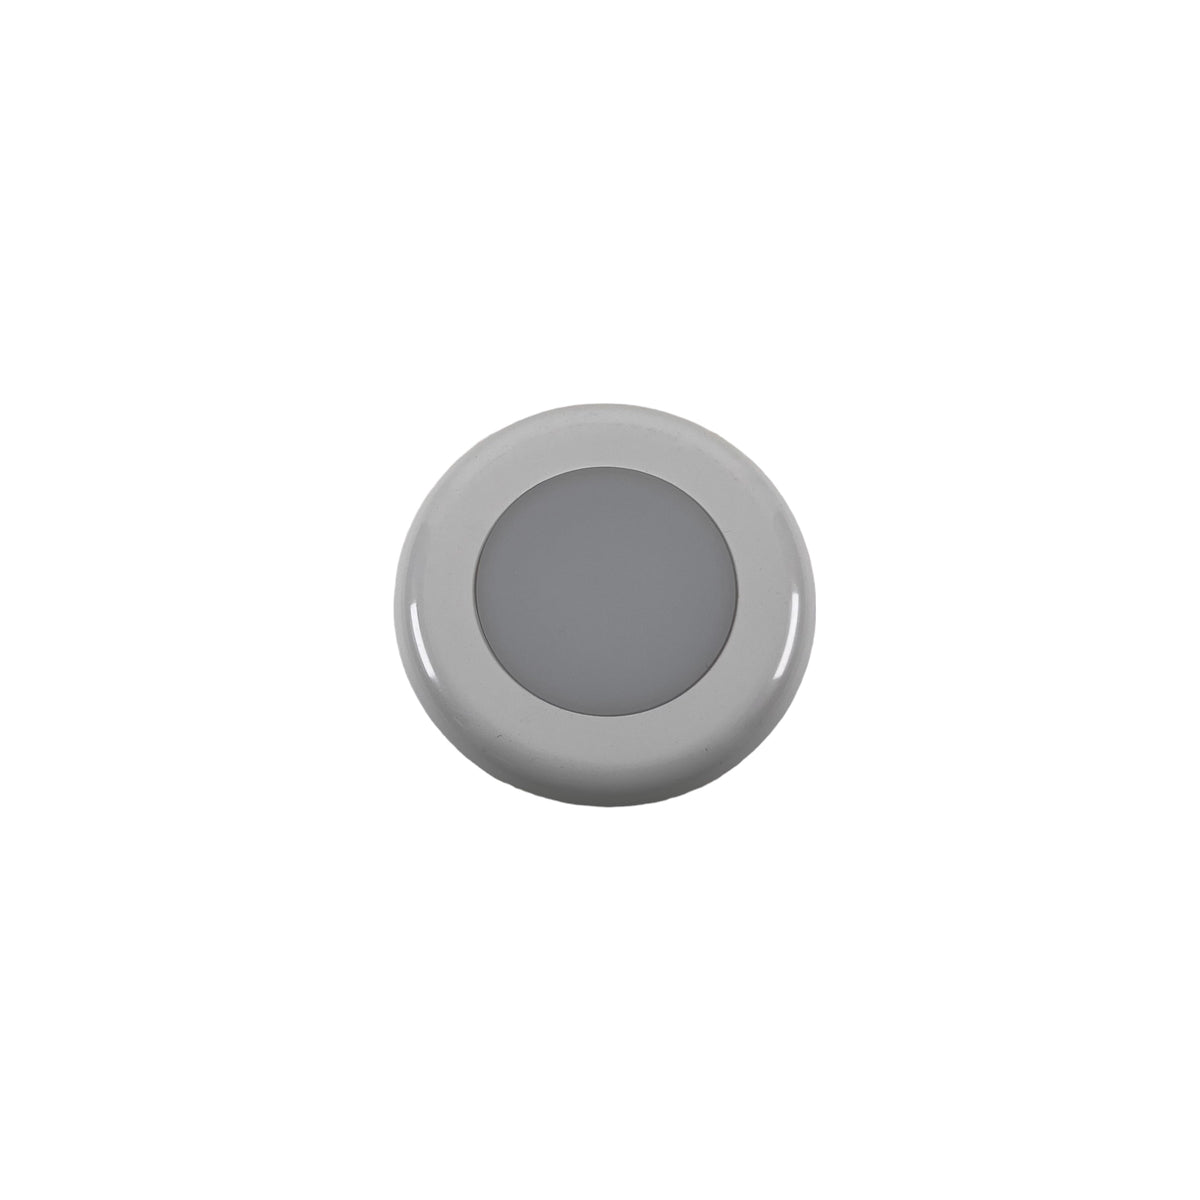 3-inch LED Recessed Puck Light, White Trim Ring